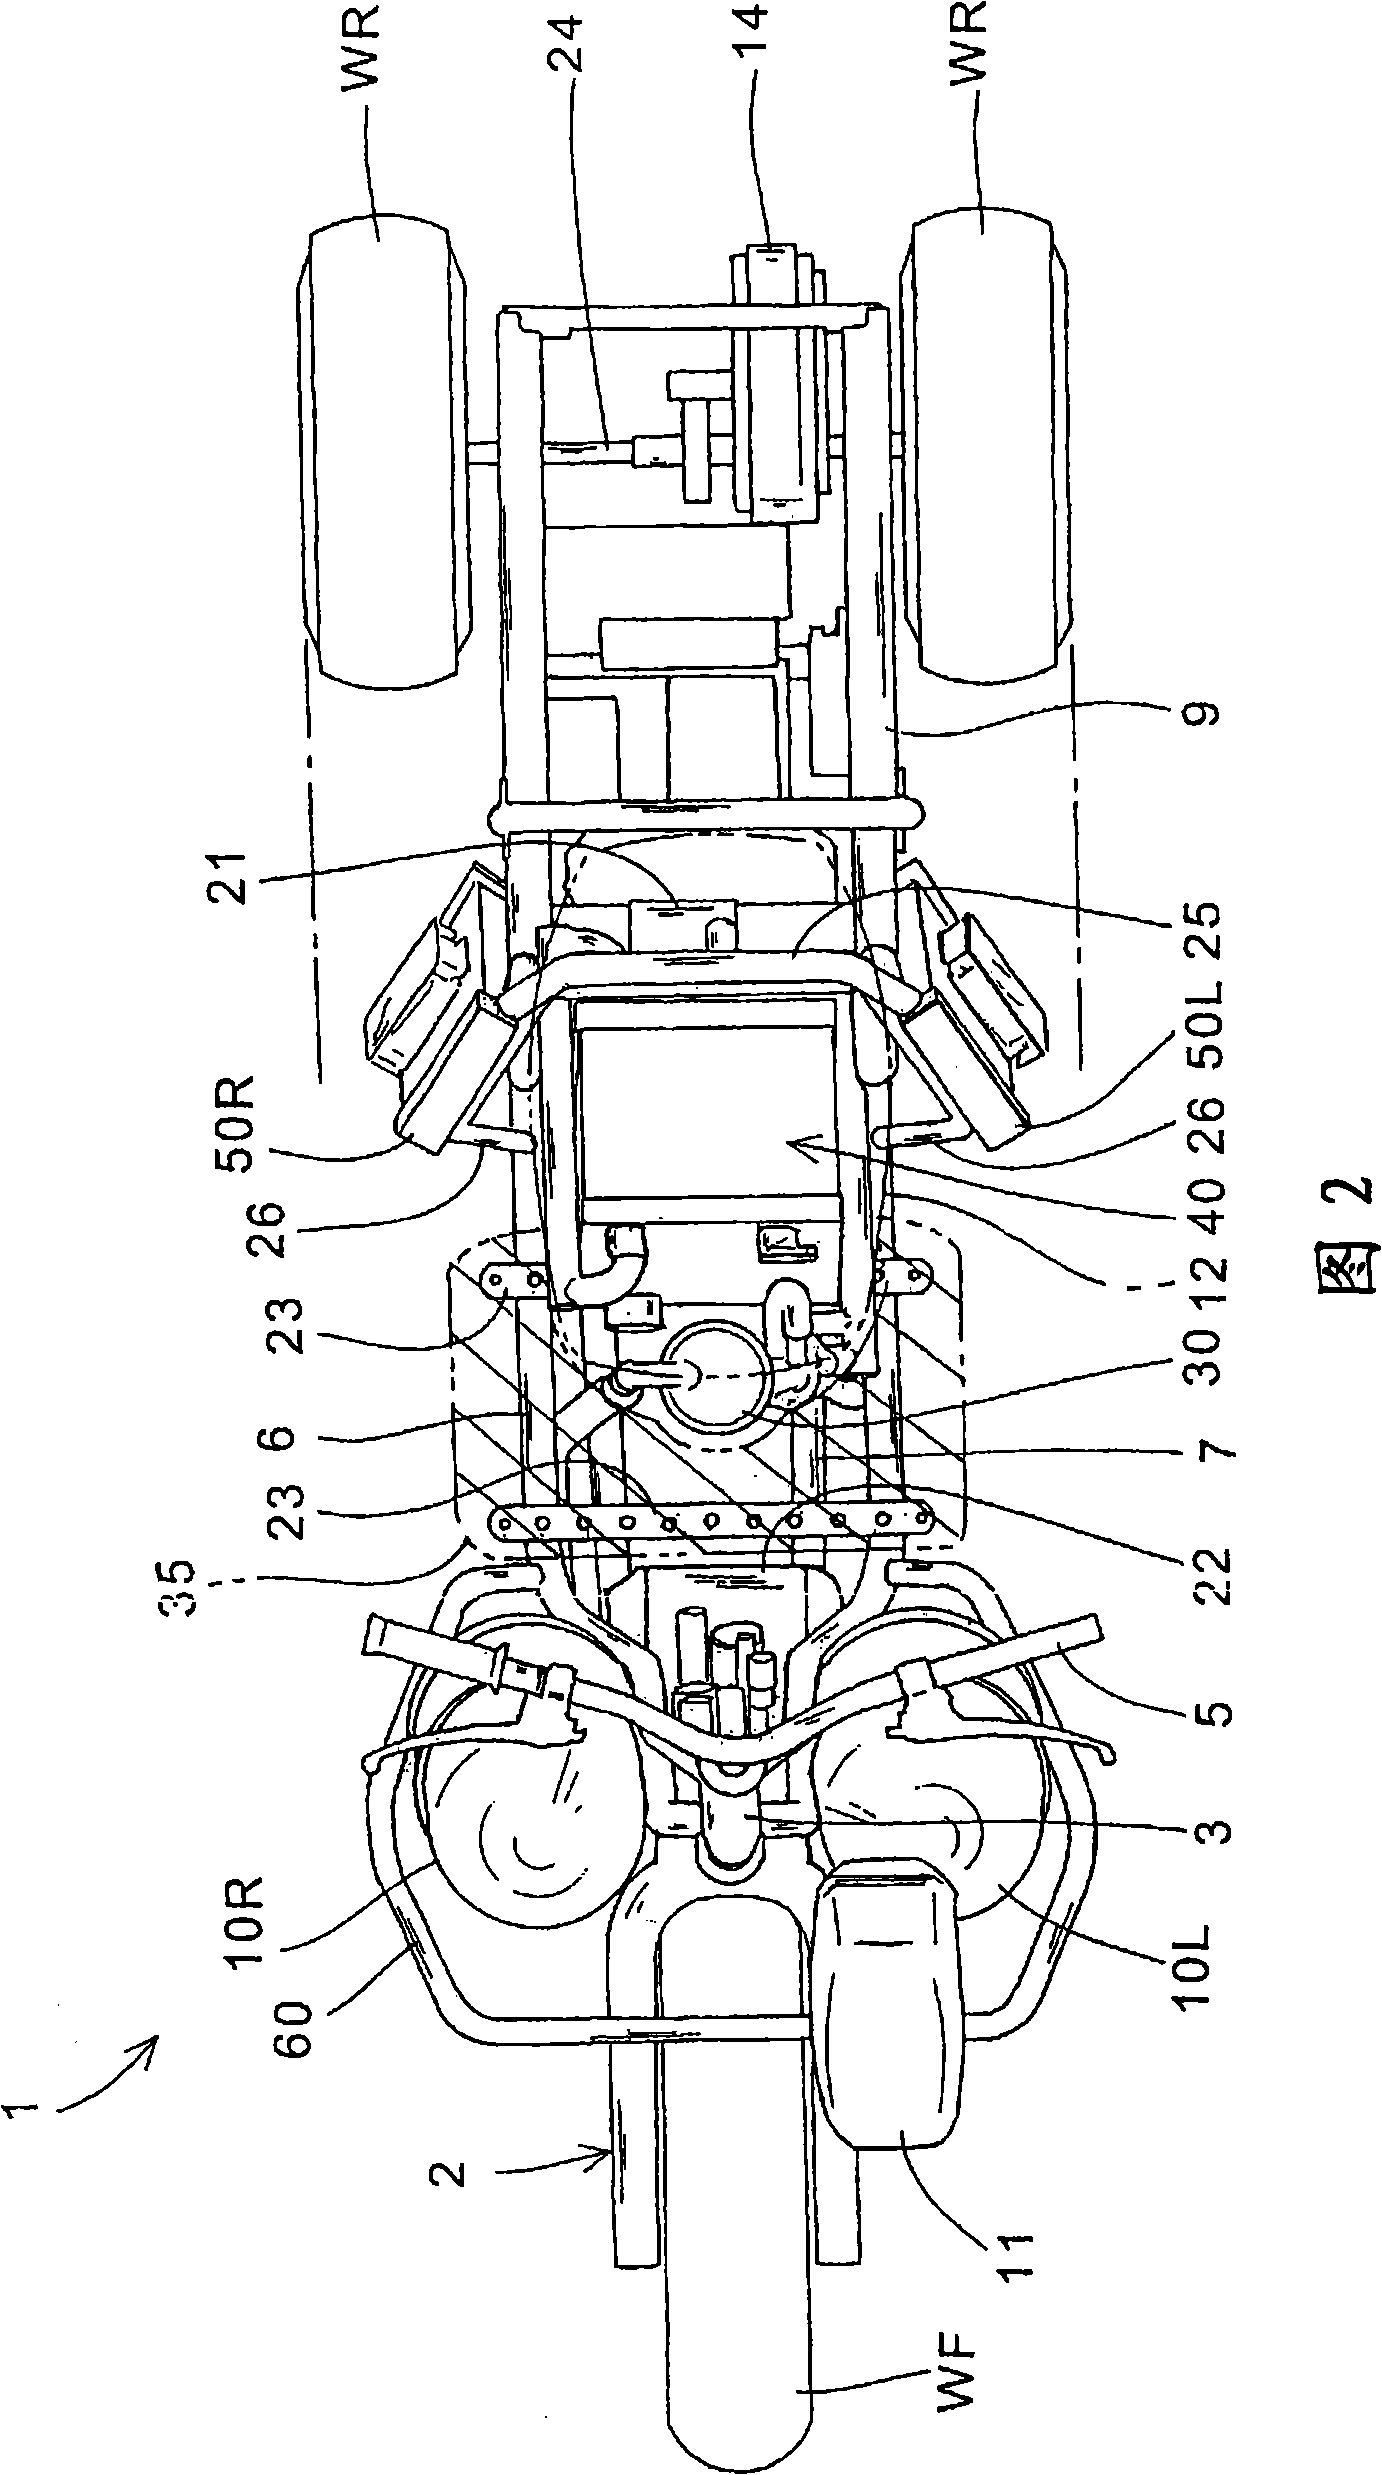 Saddle riding type fuel cell vehicle